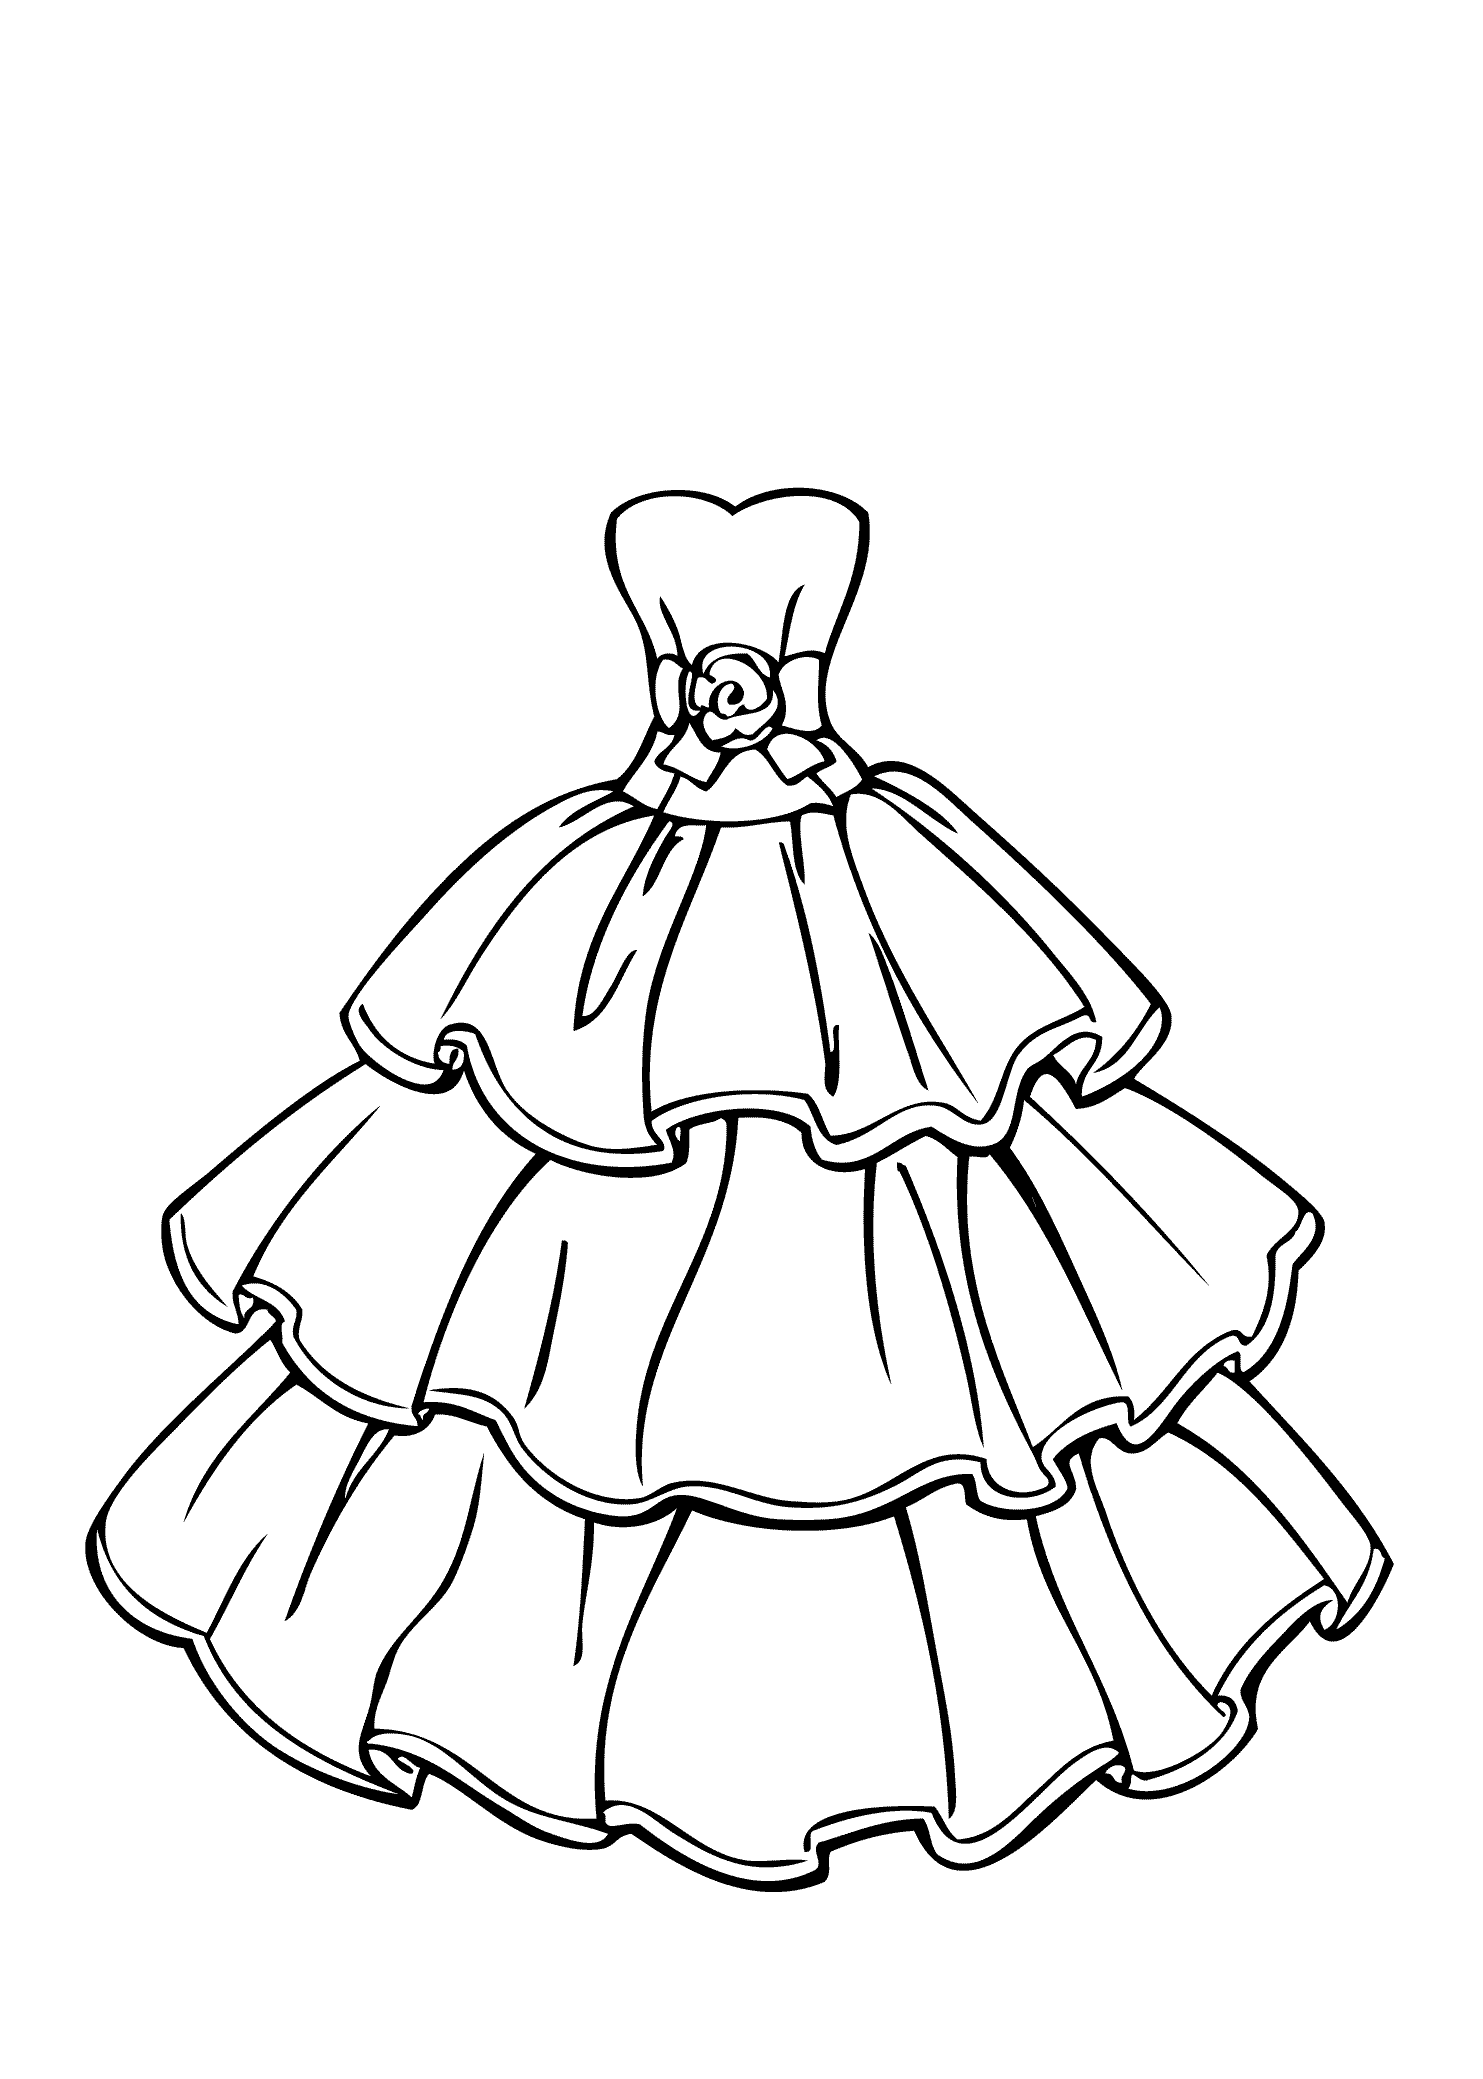 Printable Coloring Pages Fashion Clothing Home Wedding Dresses Kids Adults